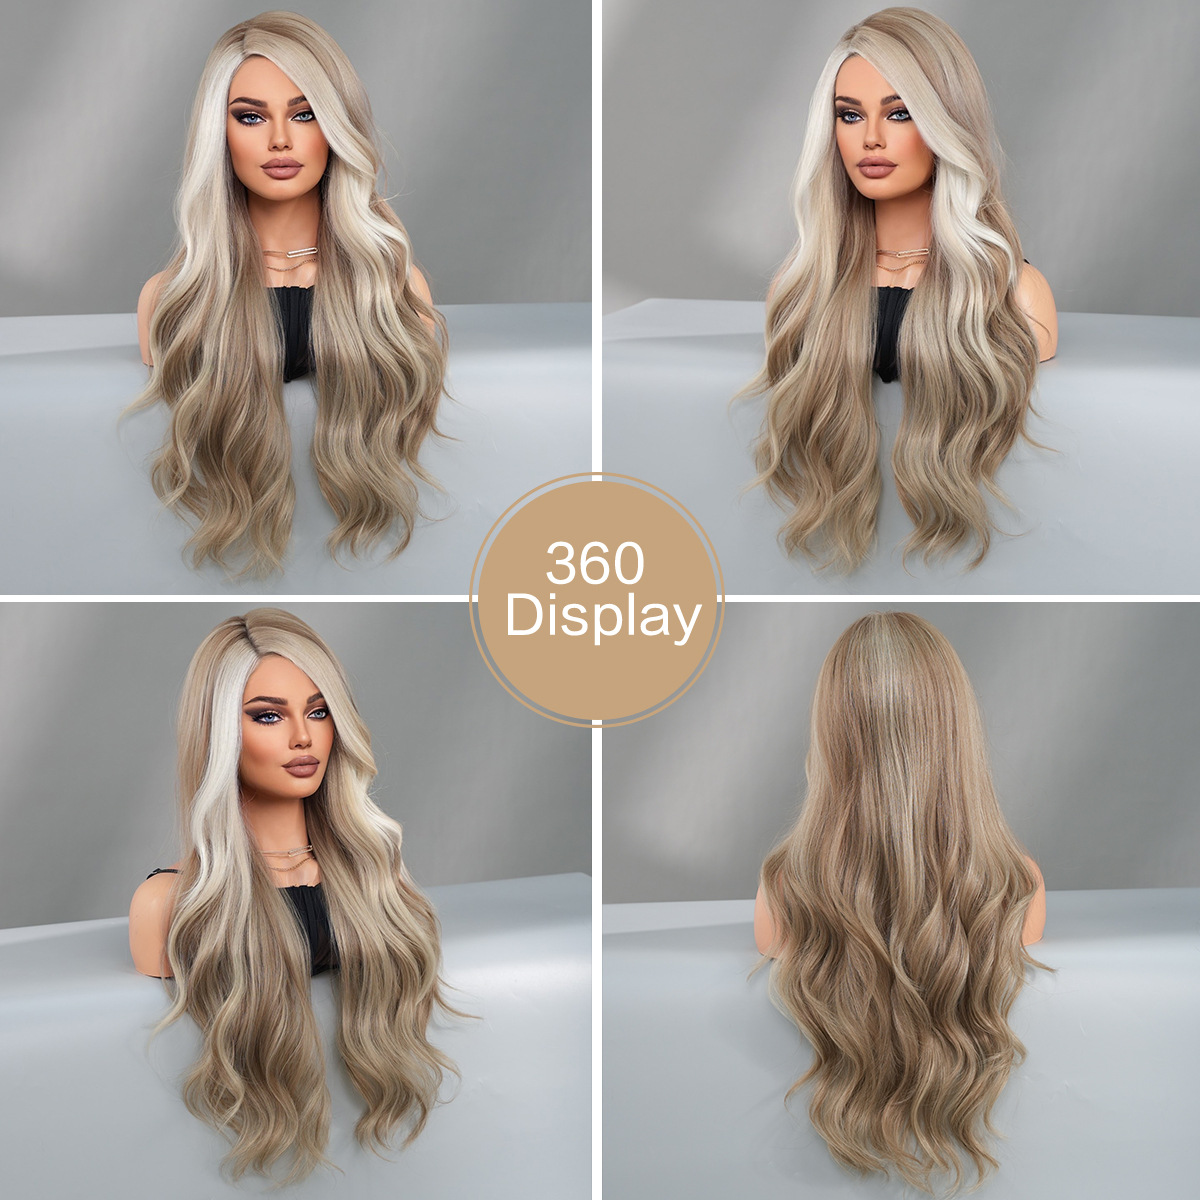 A synthetic wig featuring blue gray highlights, white waves hair, and small T chemical fiber lace, ready to wear